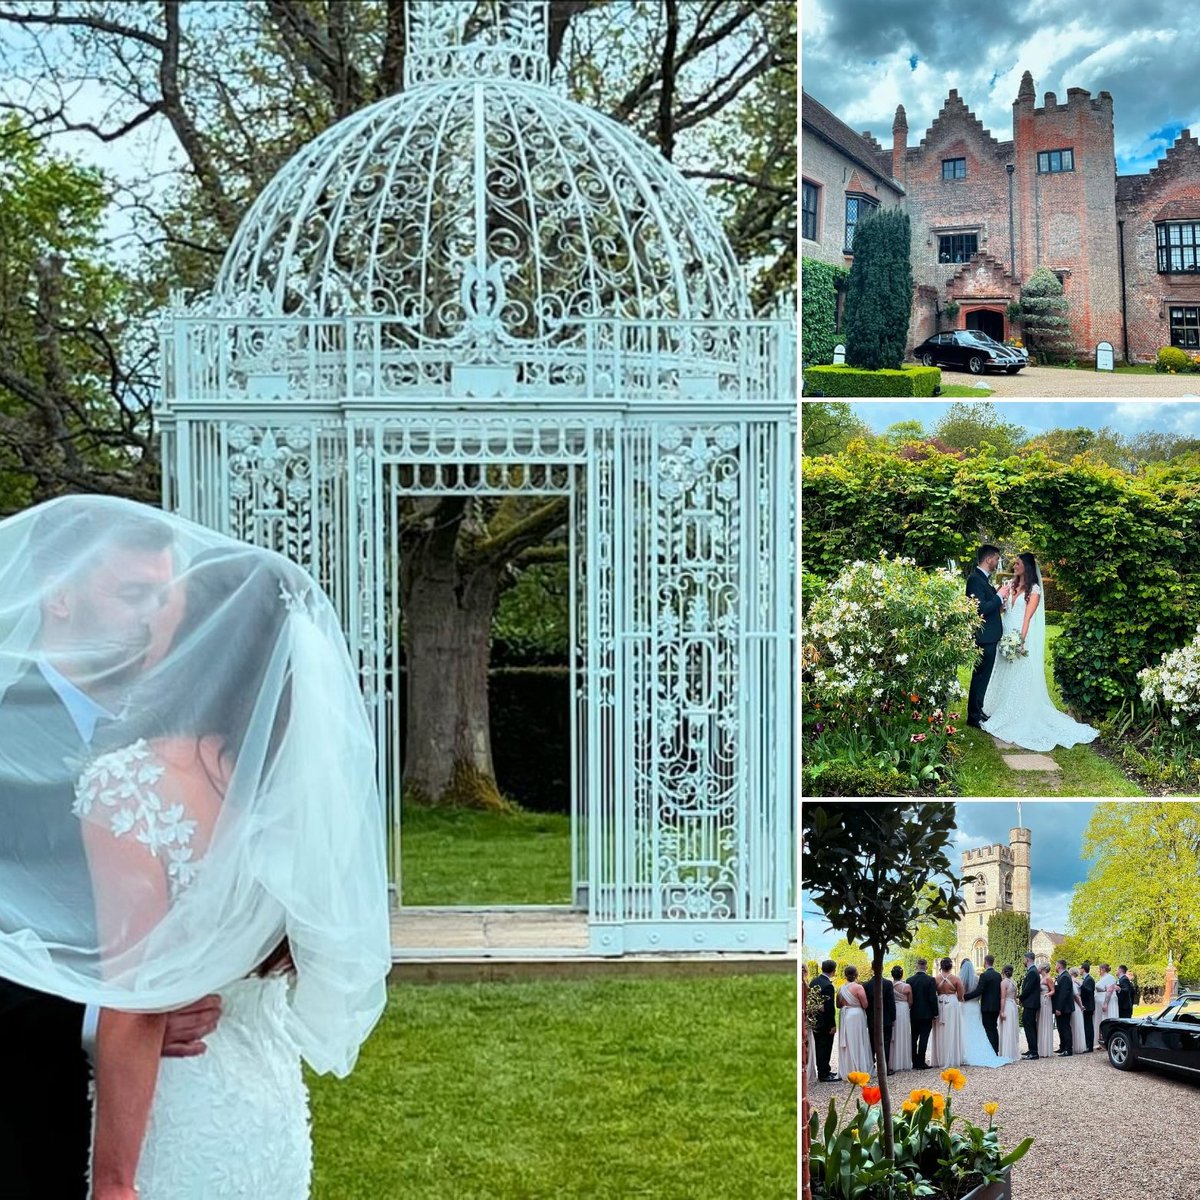 Beautiful gardens, history, a tranquil setting, dry hire venue - we offer everything you could want and more! 

We would love you to choose us for the best day of your life 🤍

 #weddingwednesday #weddingvenue